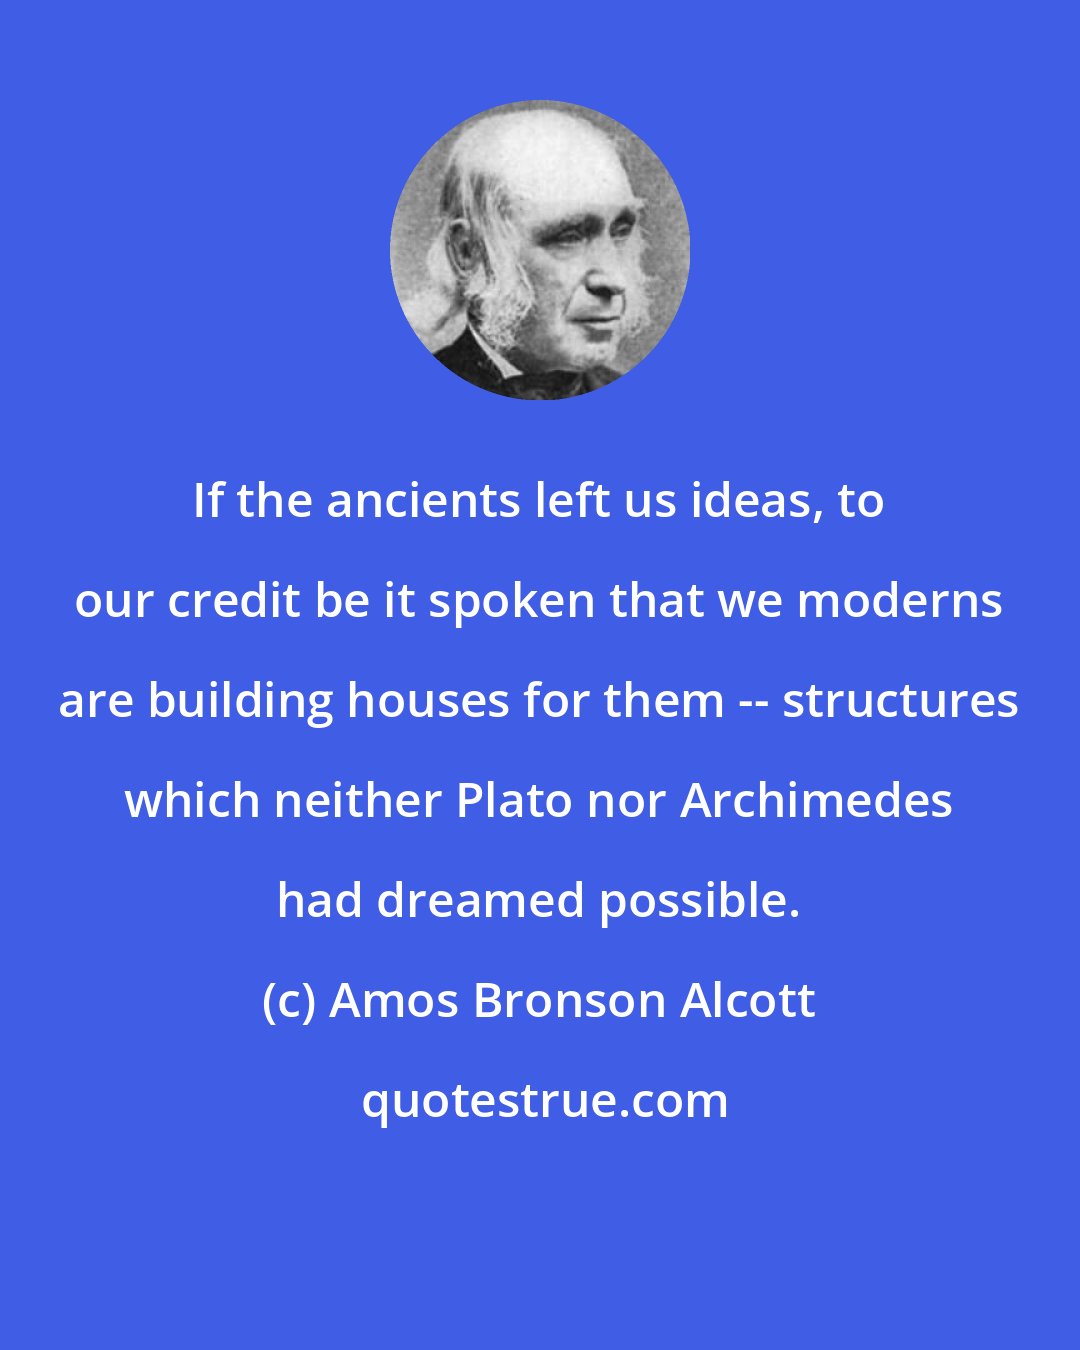 Amos Bronson Alcott: If the ancients left us ideas, to our credit be it spoken that we moderns are building houses for them -- structures which neither Plato nor Archimedes had dreamed possible.